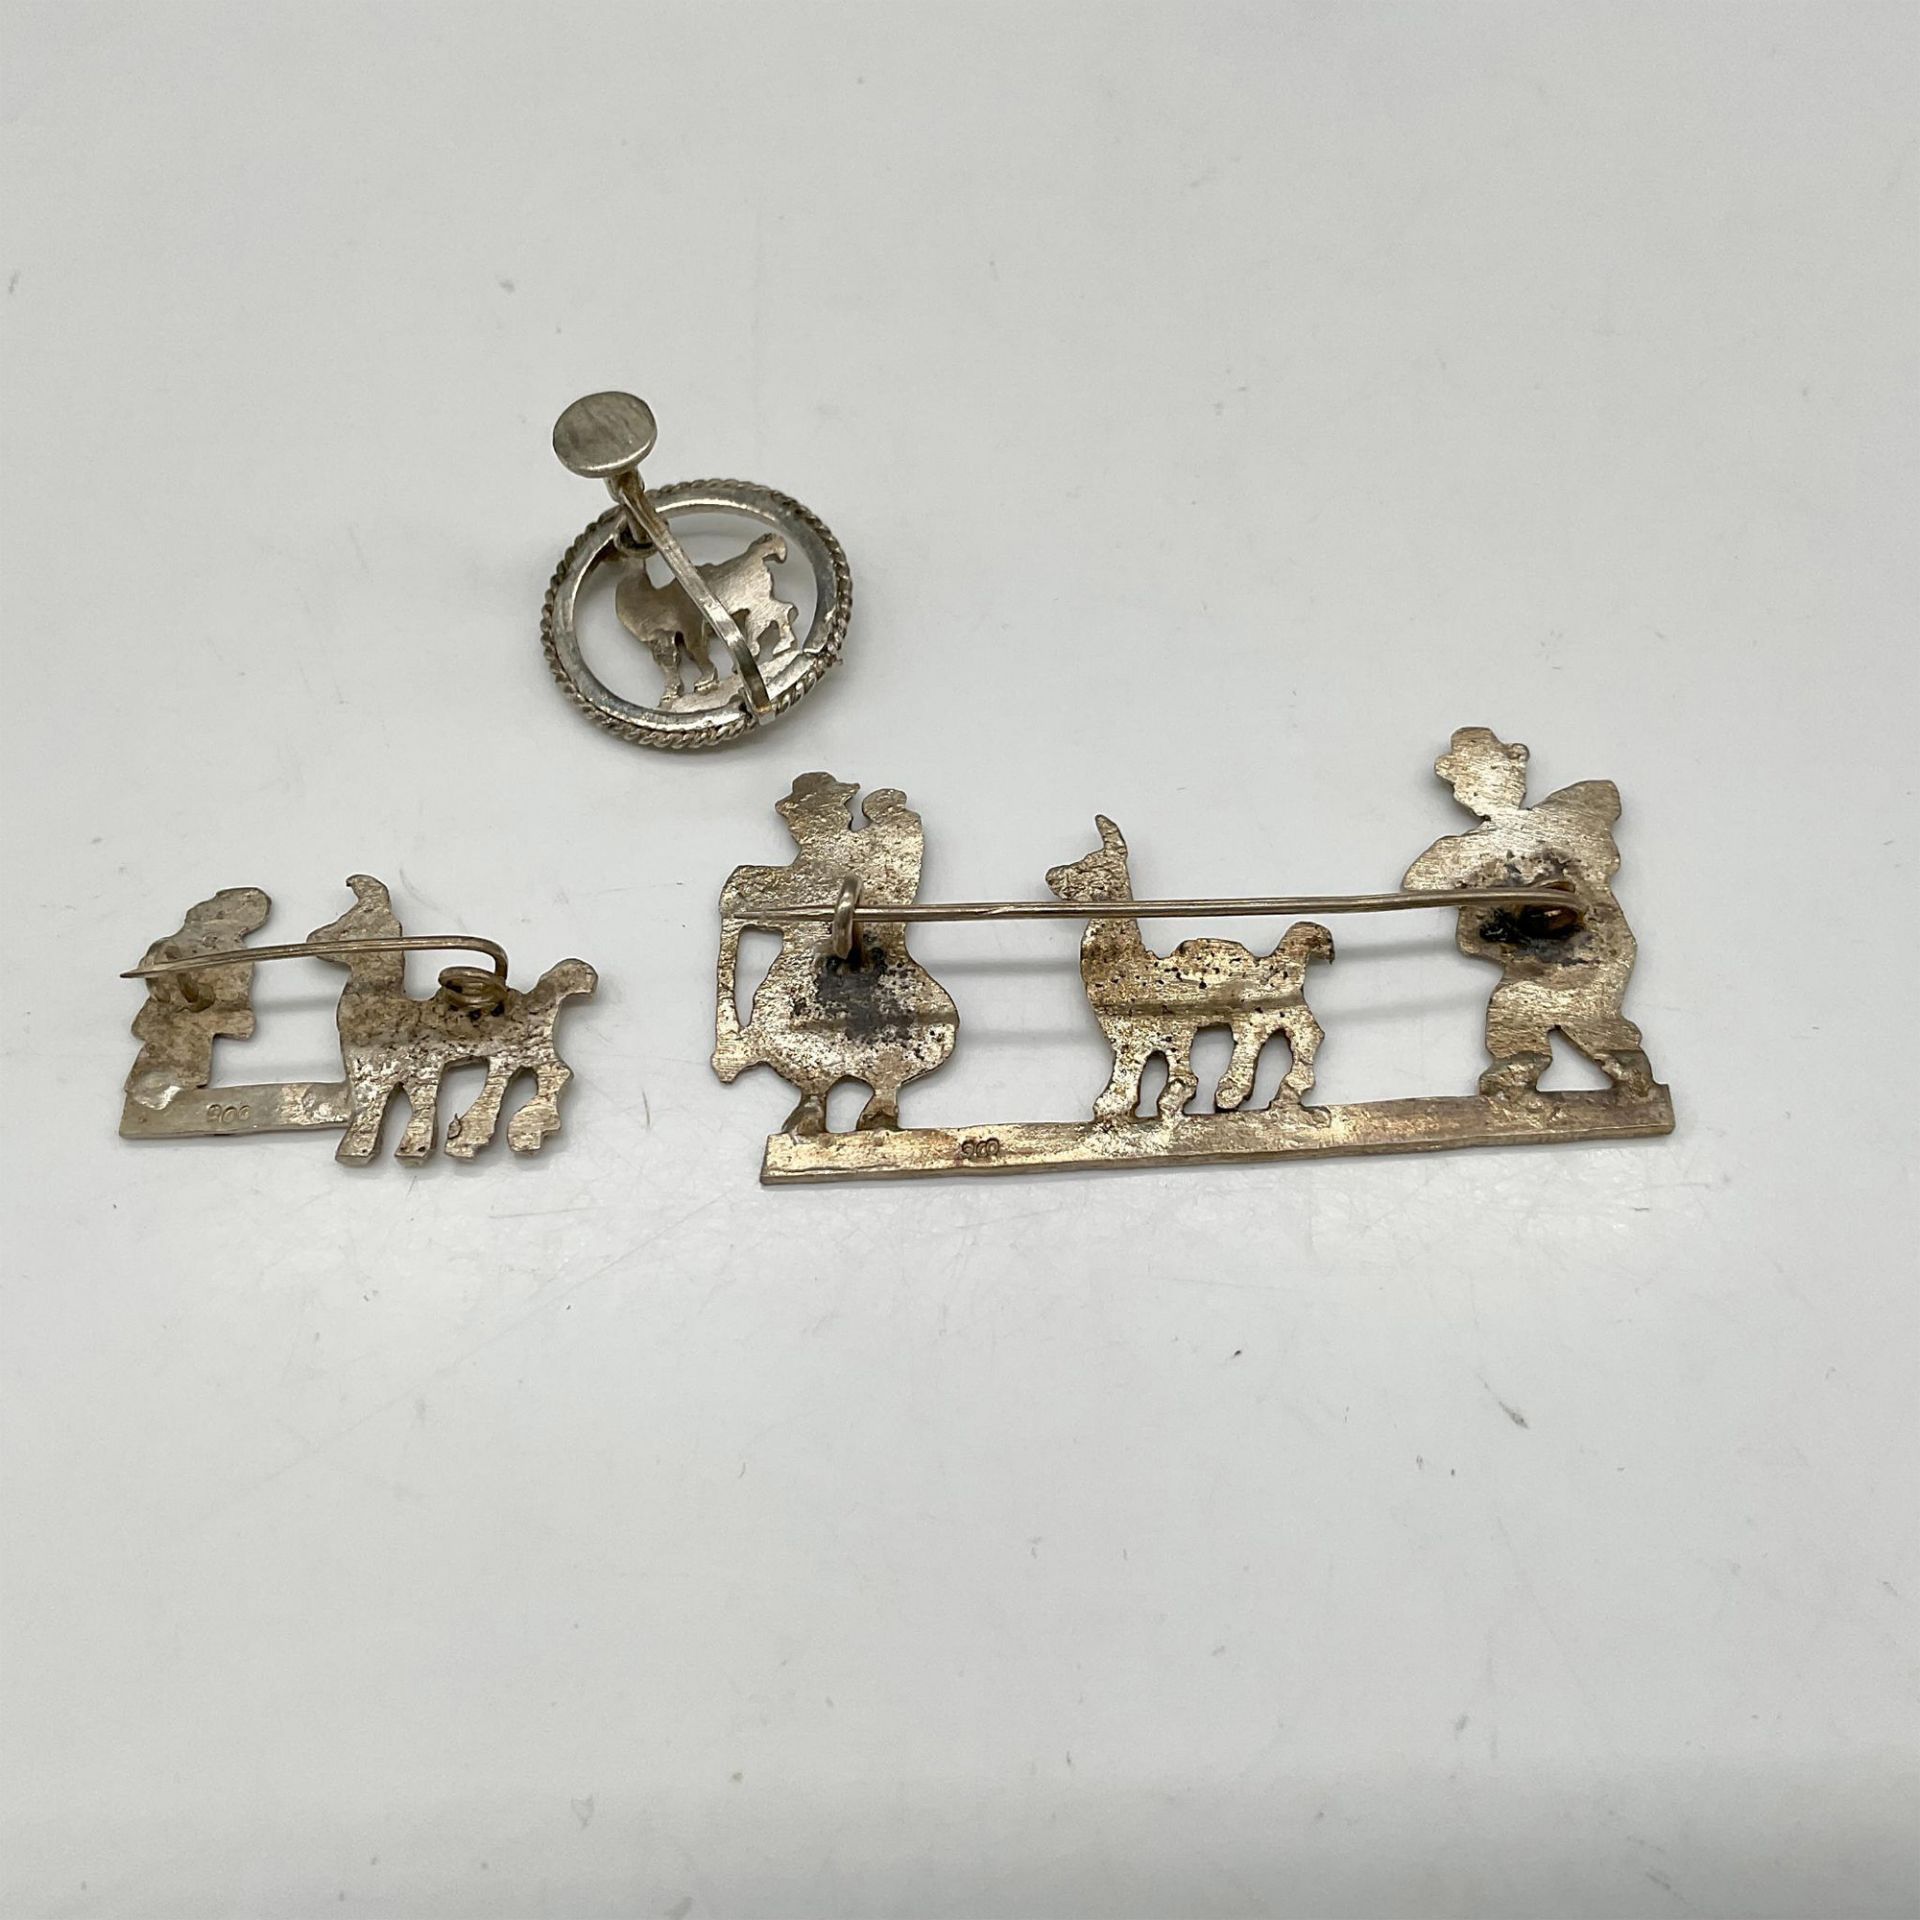 3pc Peruvian Silver Pins + Earring - Image 2 of 2